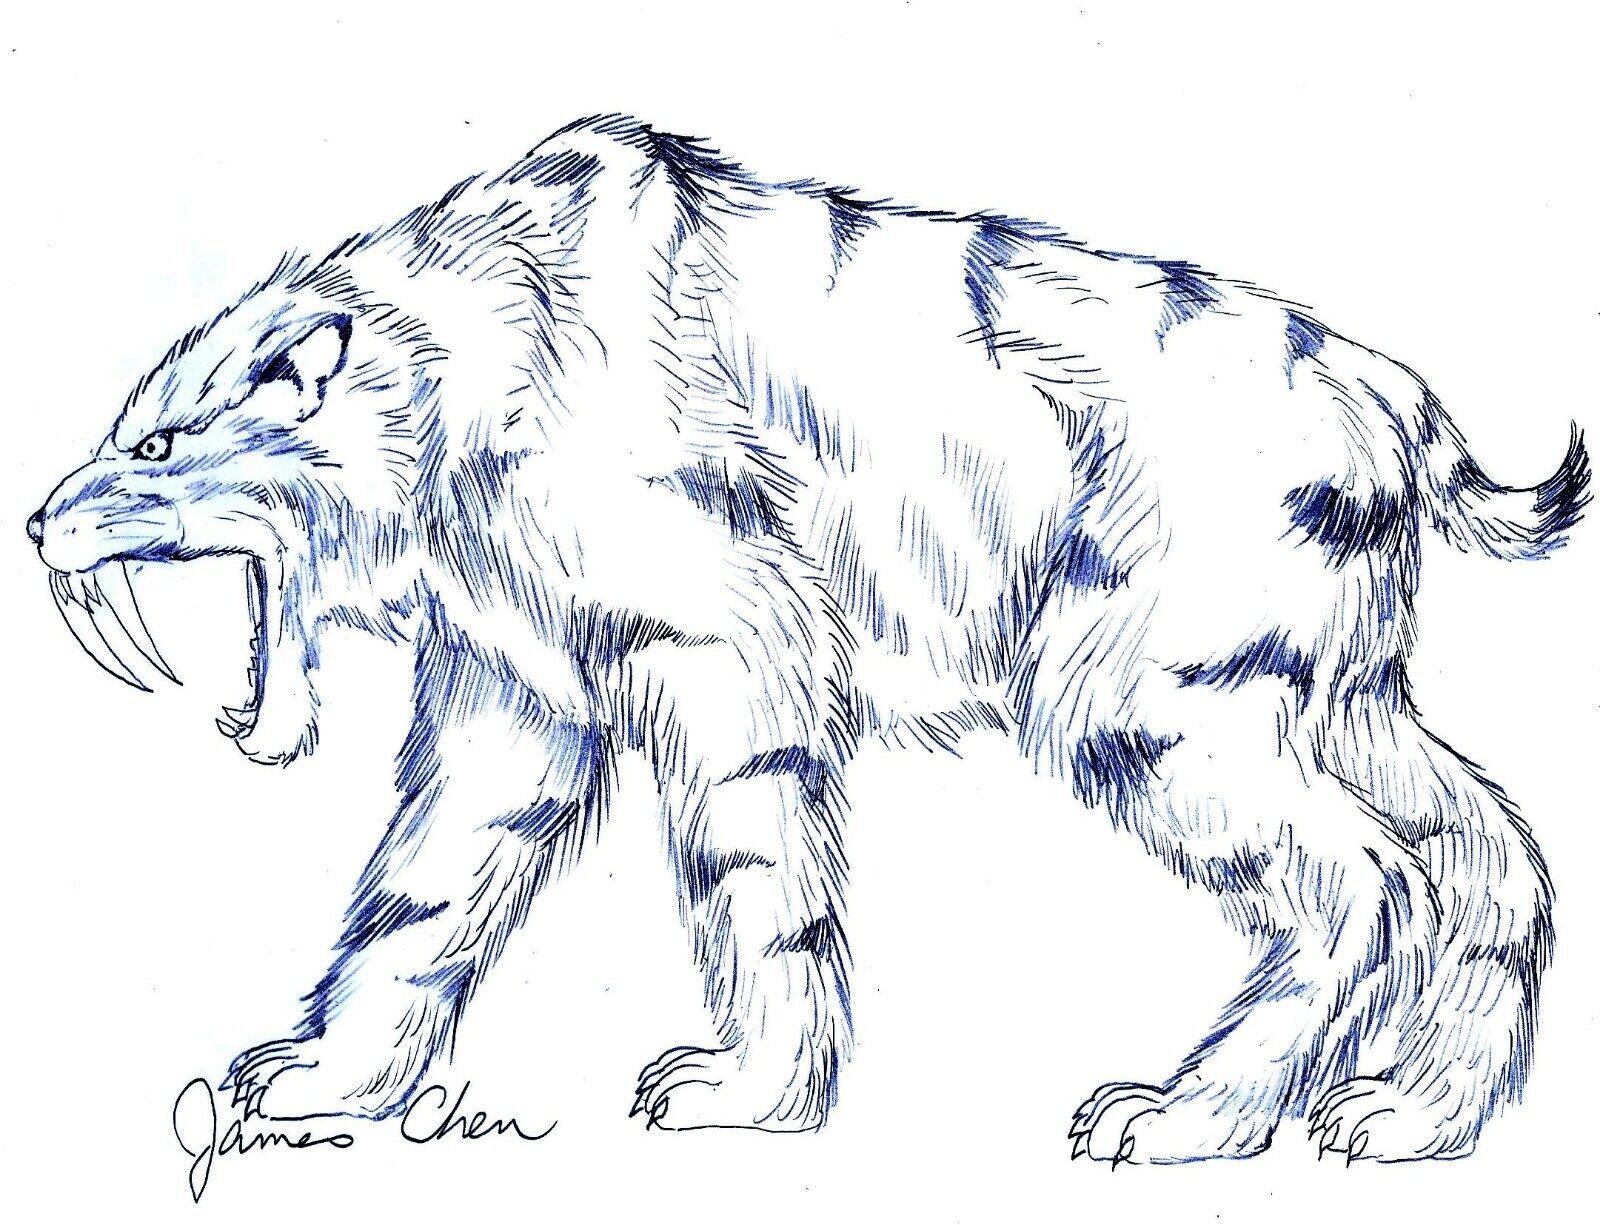 Smilodon the saber tooth tiger original comic art by comicbook artist james chen